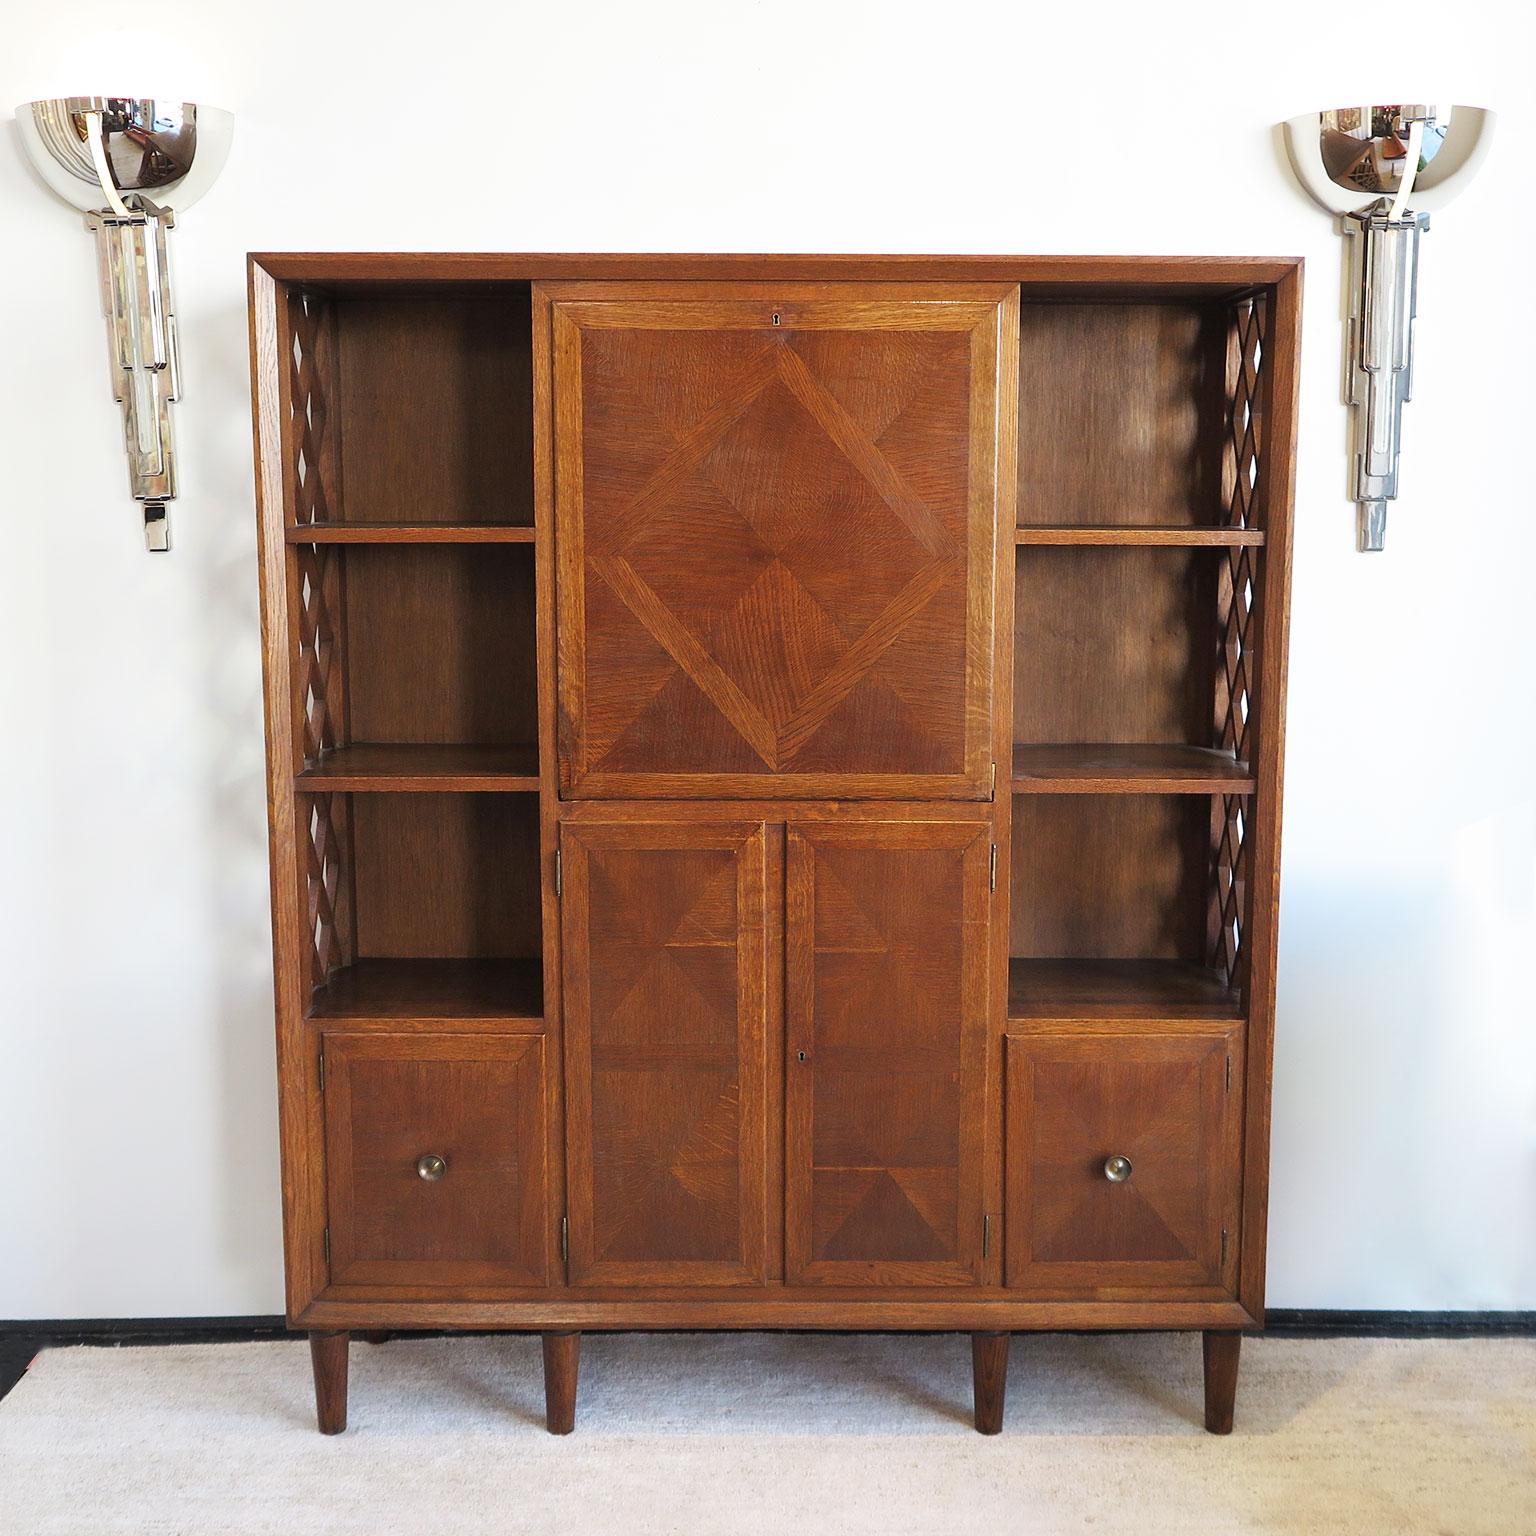 Mid-Century Modern Midcentury Cabinet Arttributed to E. Lanzia, Italy, circa 1940s For Sale